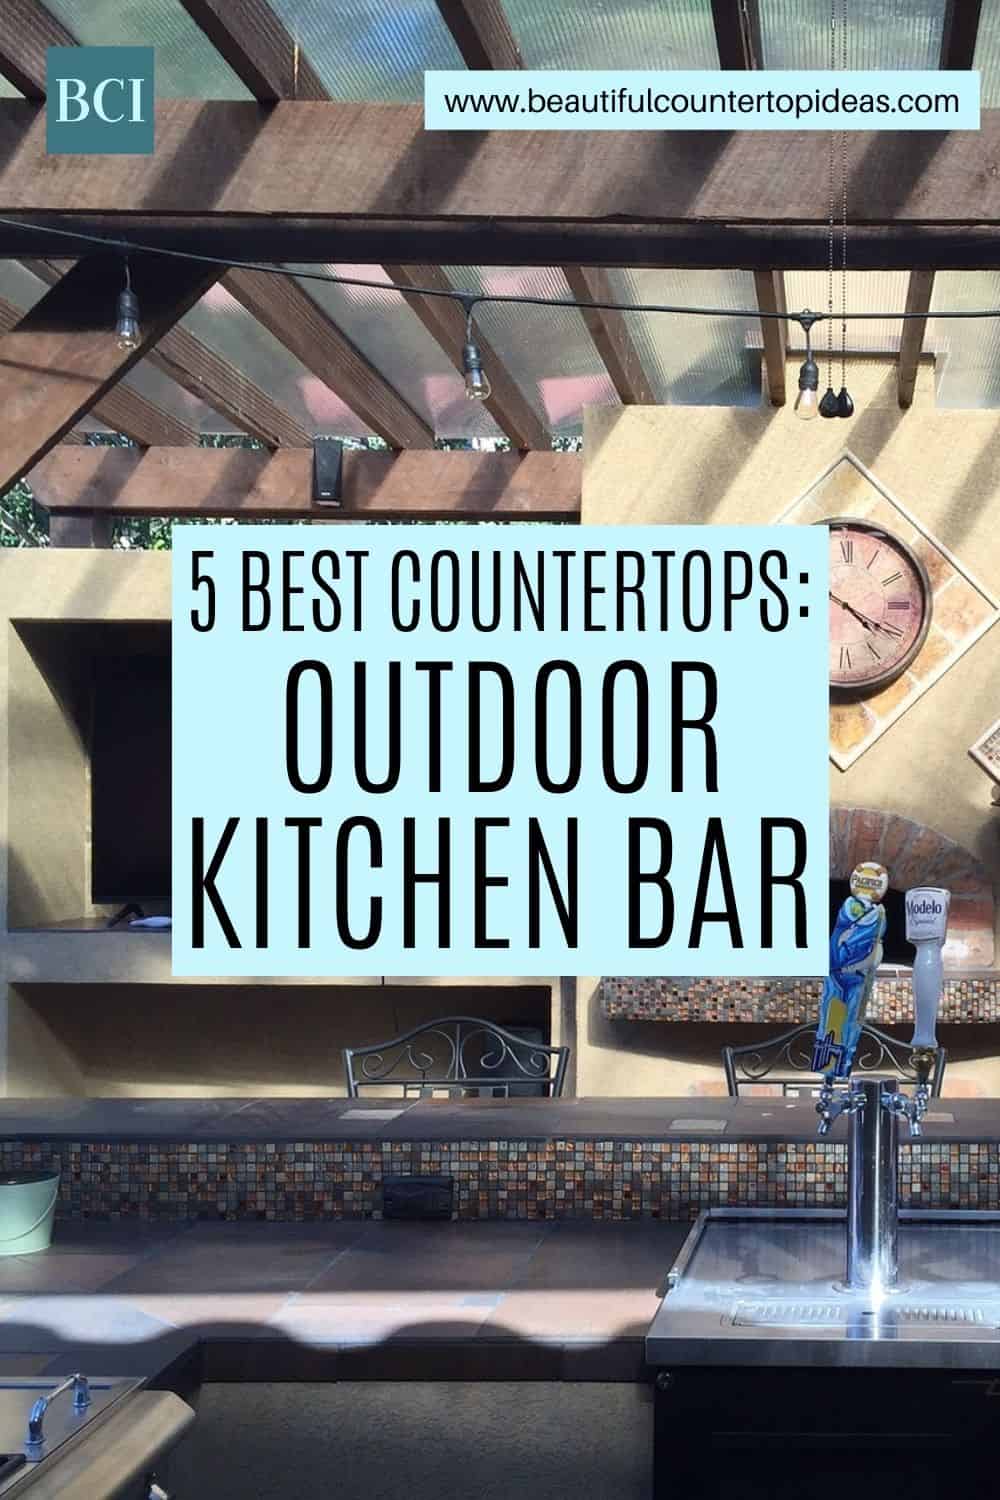 Ready to take your backyard to the next level with an outdoor kitchen bar? Get advice on the best countertop materials for your new watering hole.